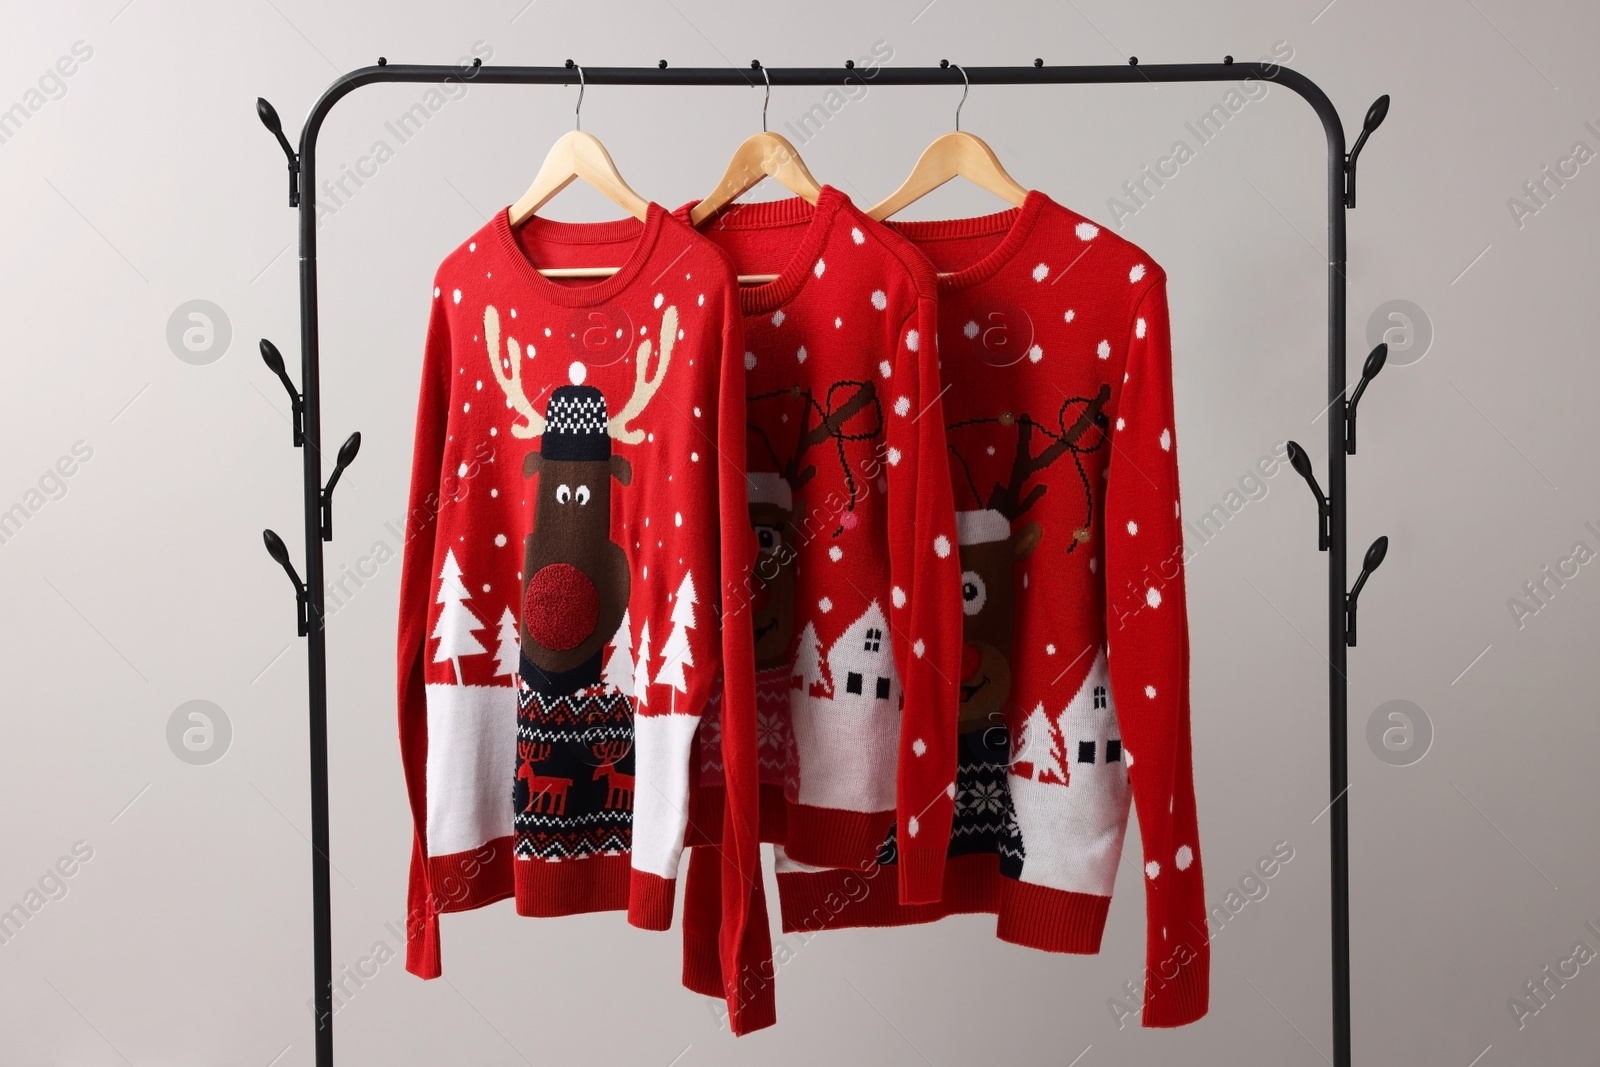 Photo of Different Christmas sweaters hanging on rack against light background